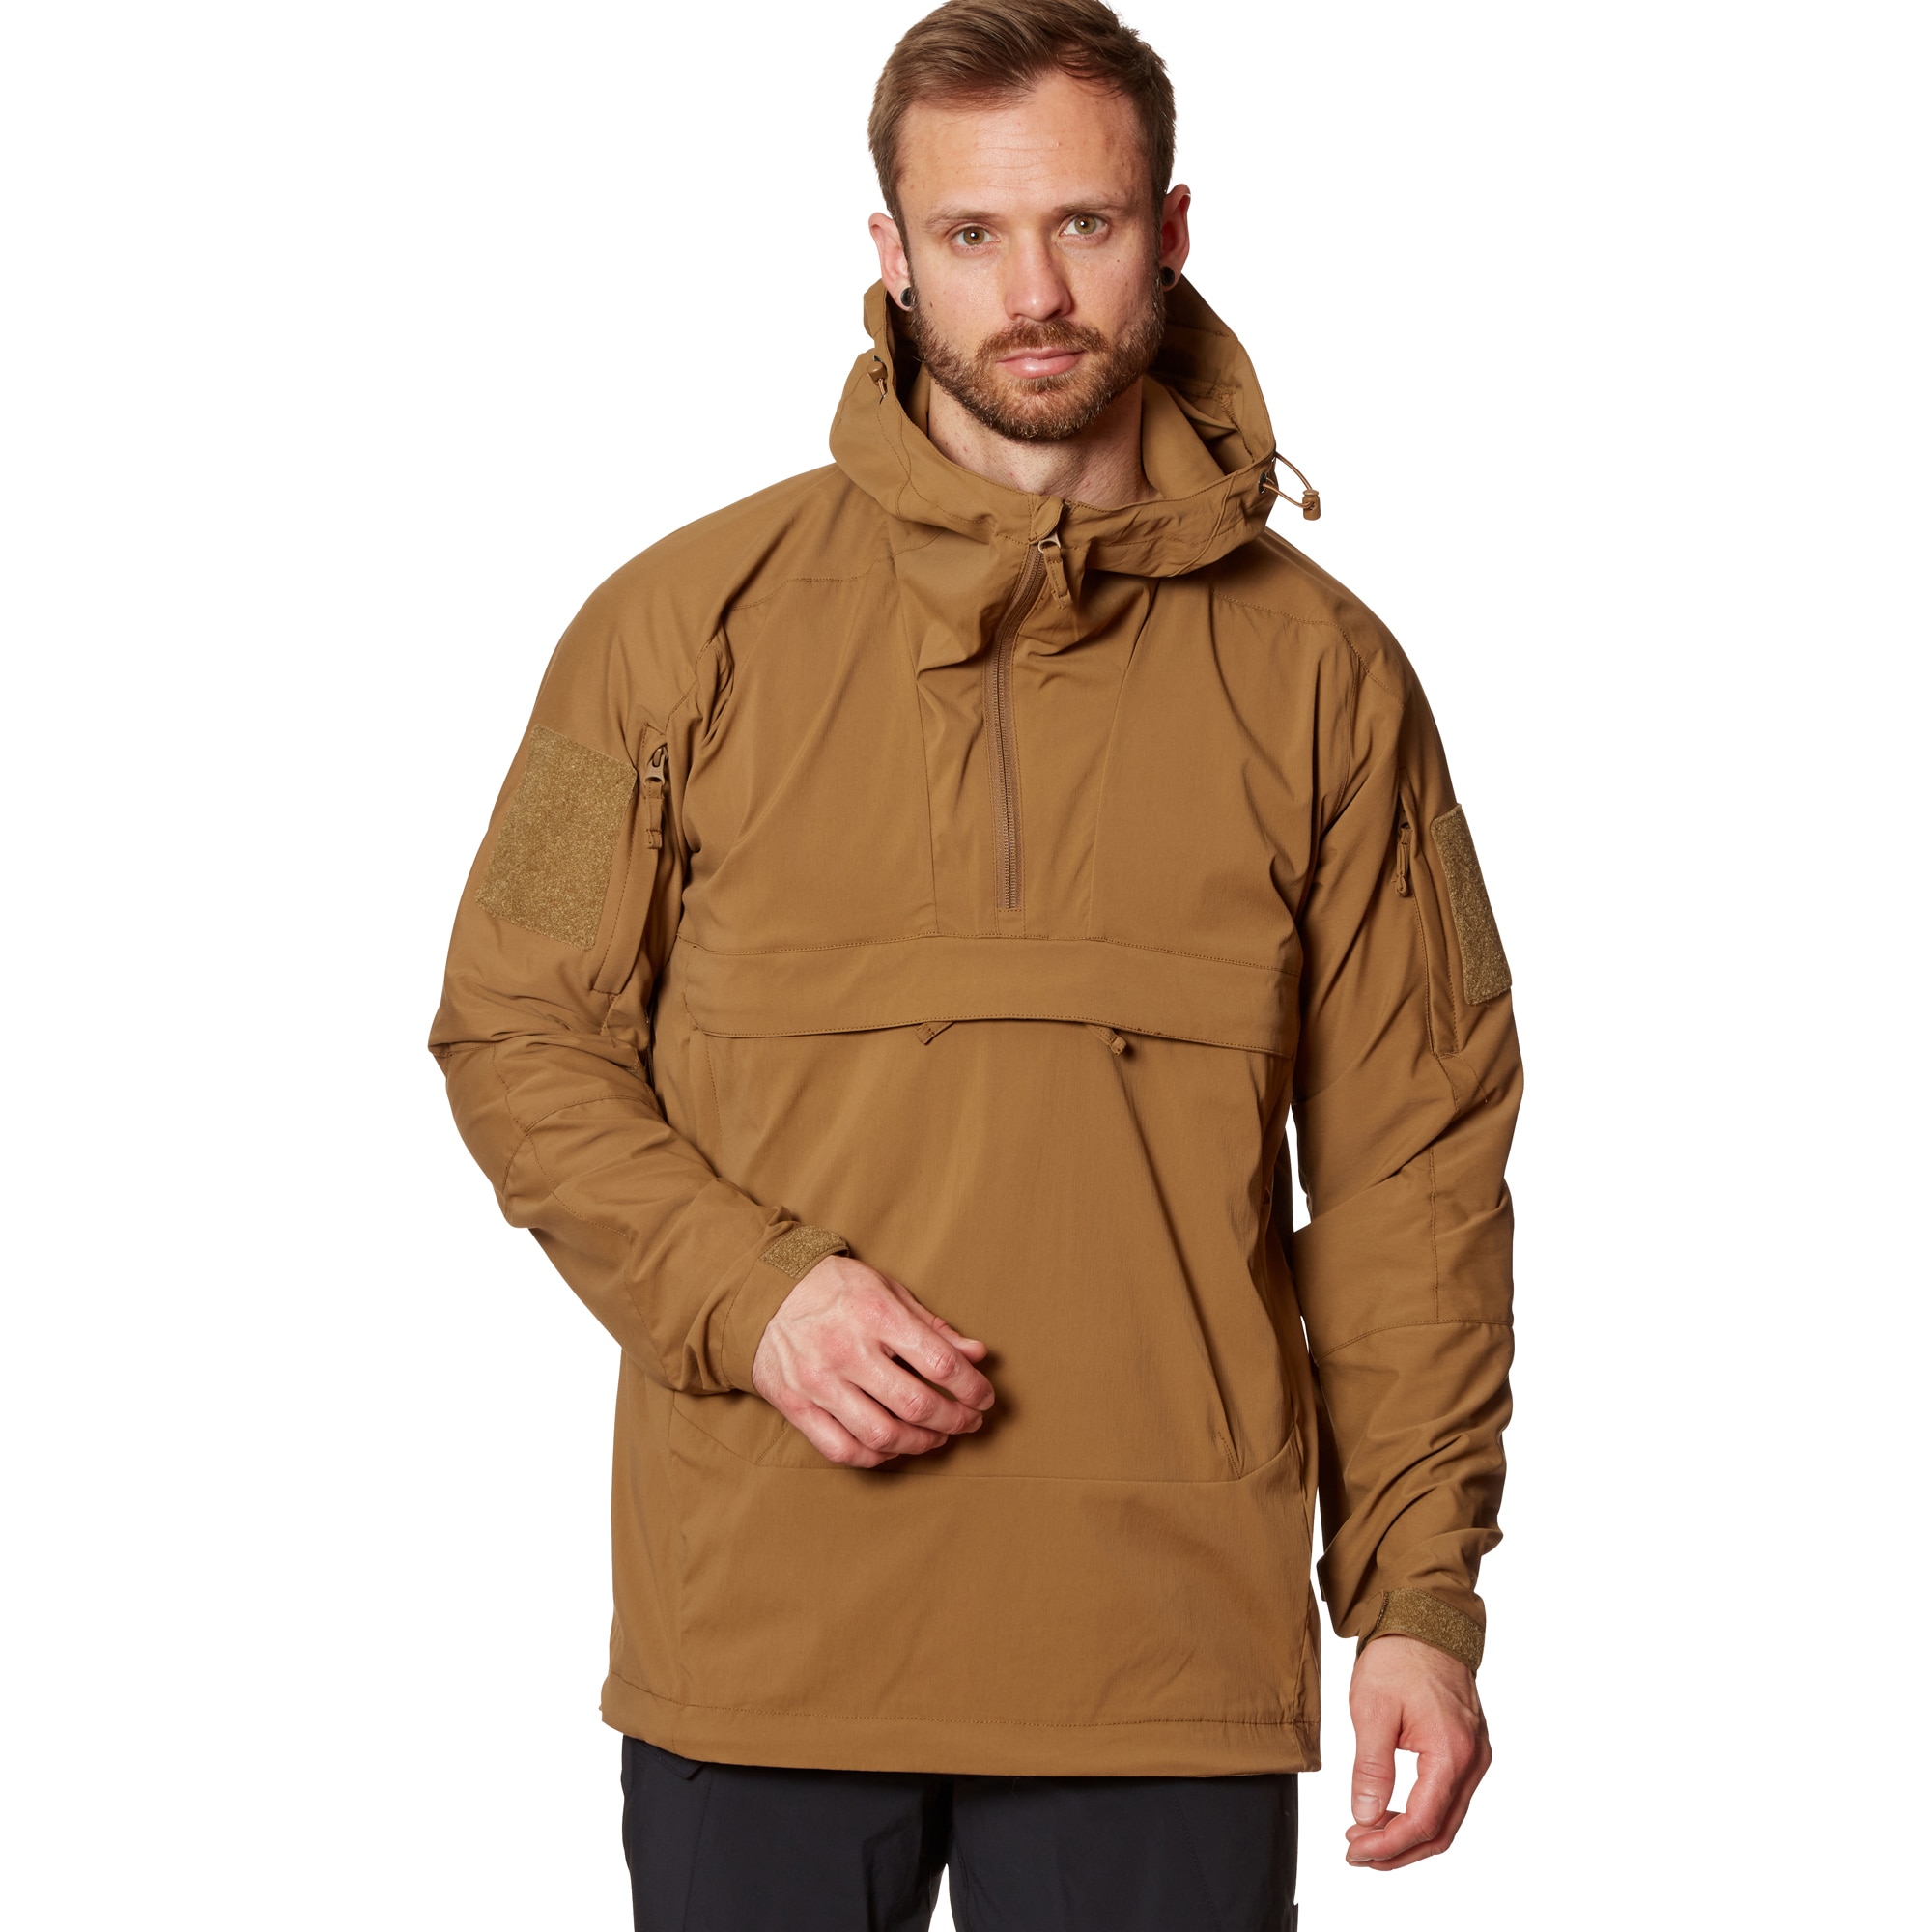 Purchase the Helikon-Tex Mistral Anorak Jacket coyote by ASMC